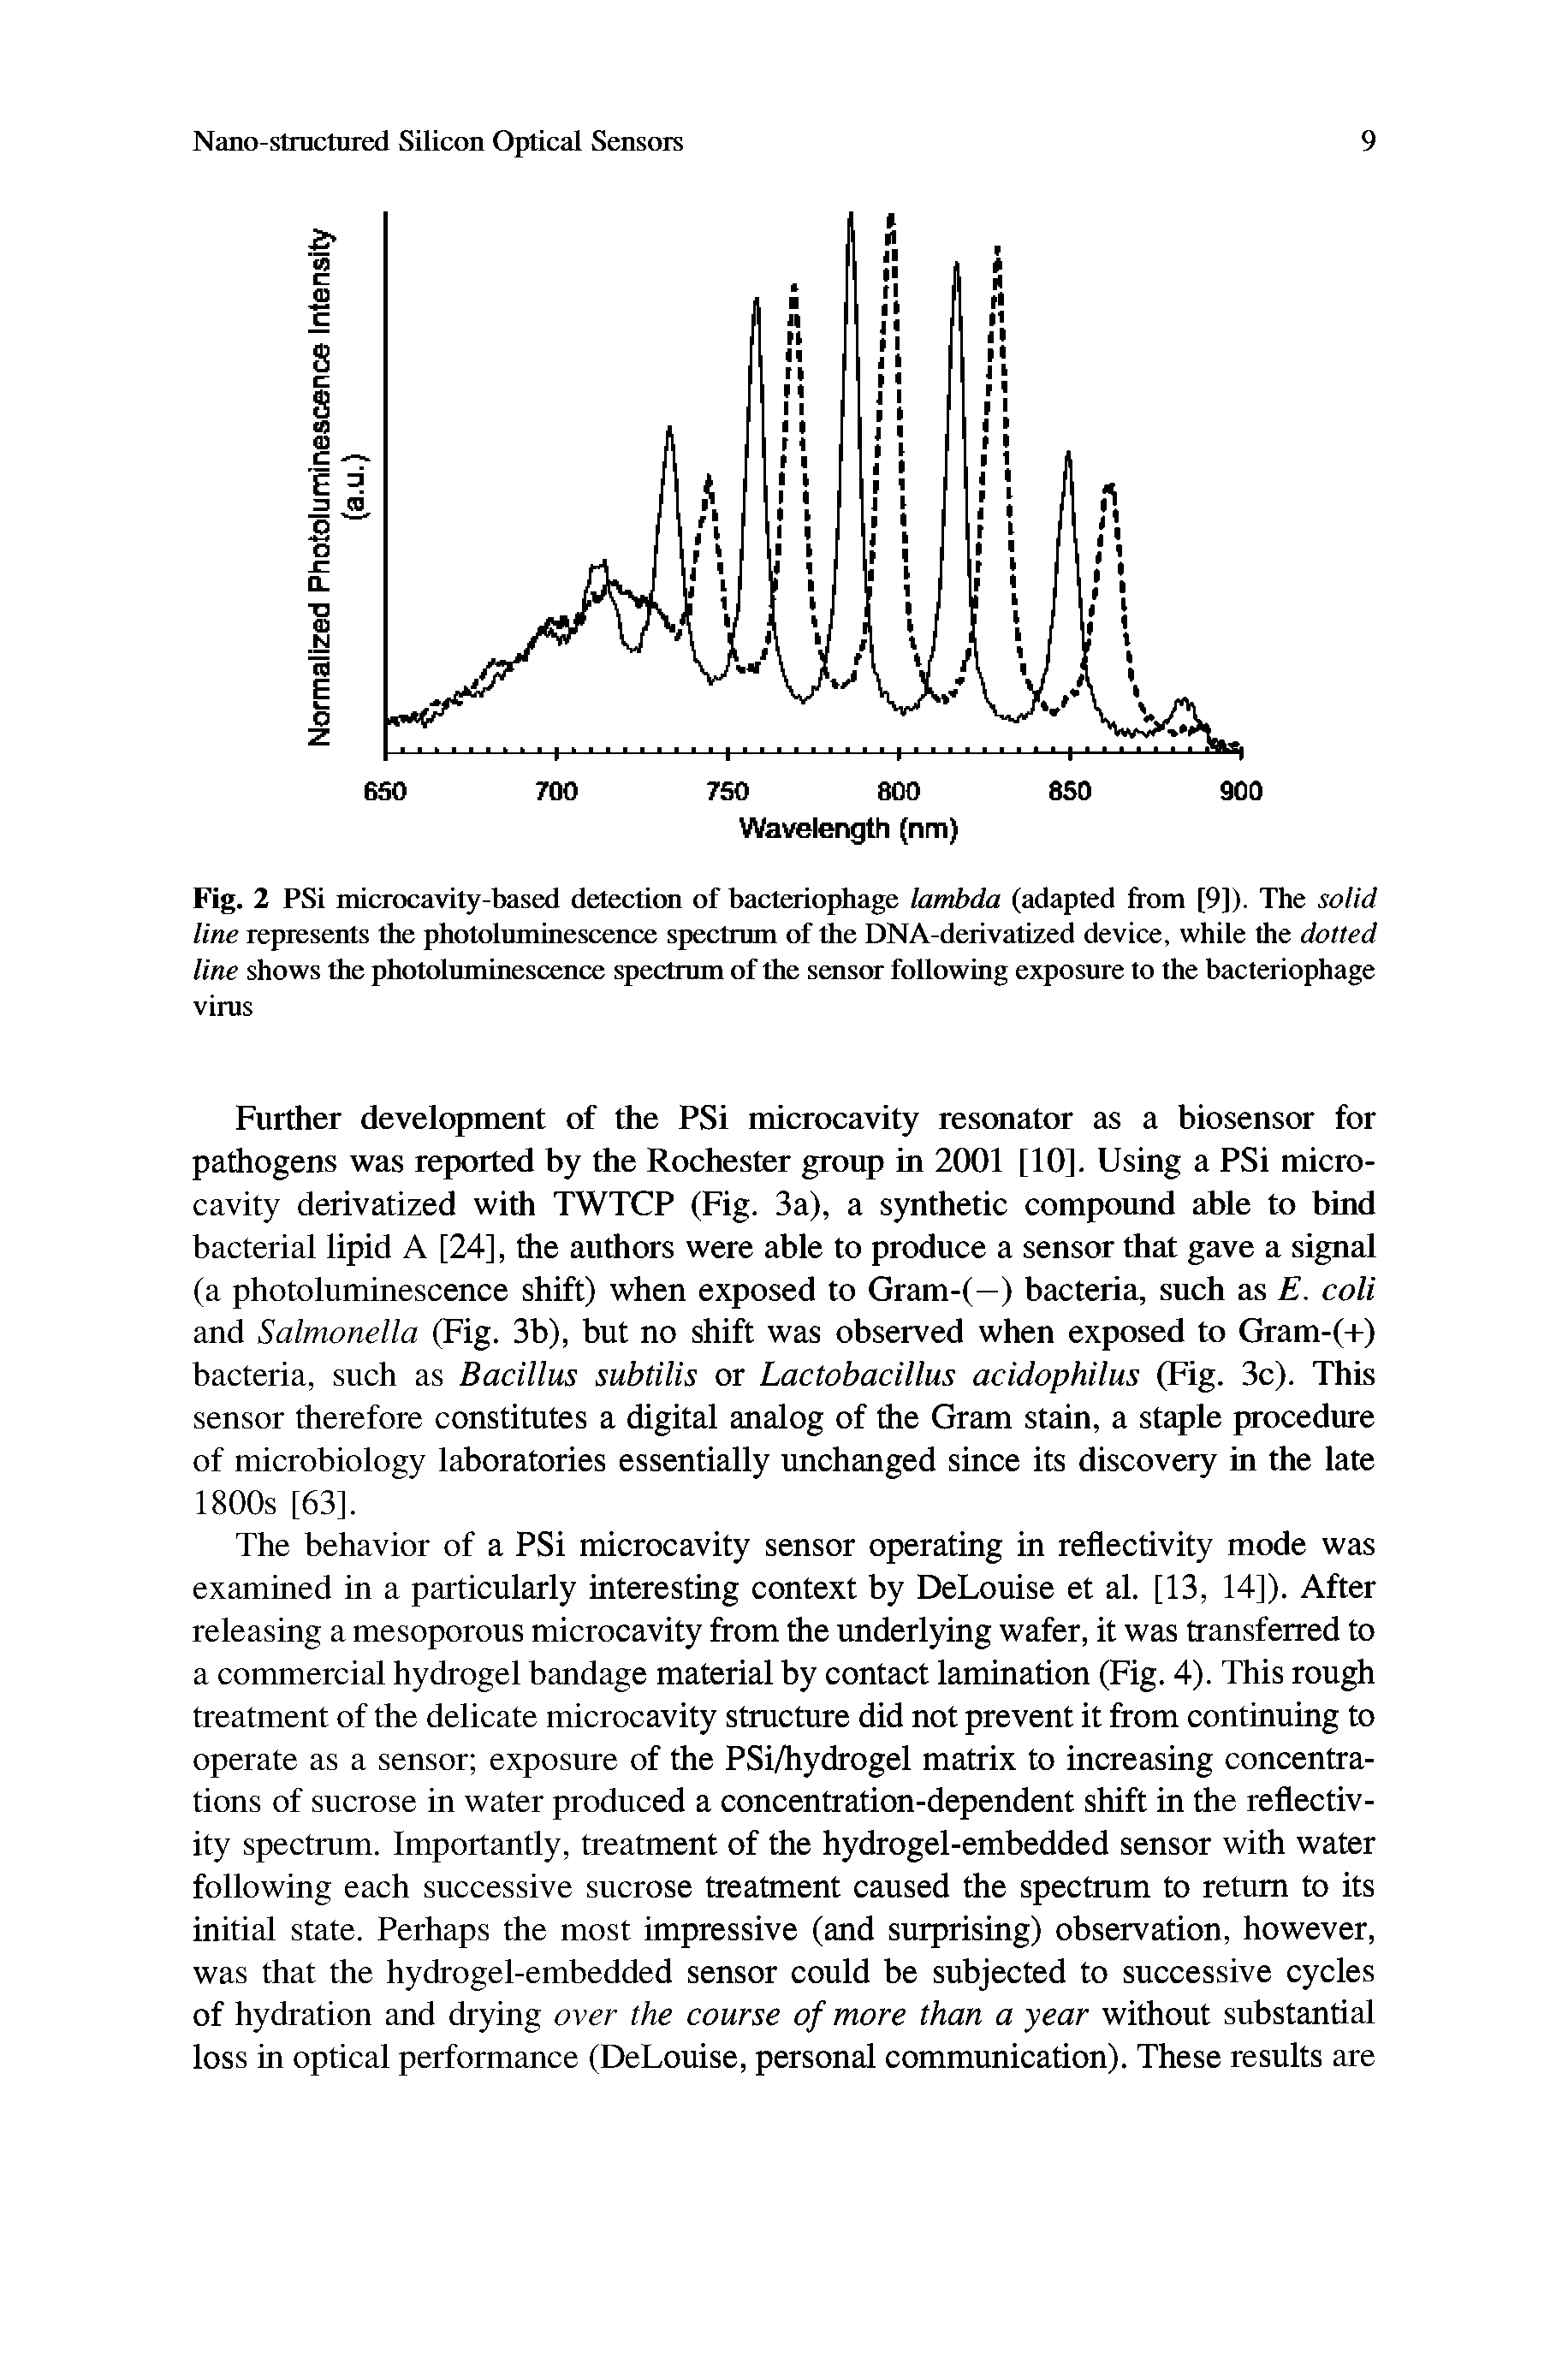 Fig. 2 PSi microcavity-based detection of bacteriophage lambda (adapted from [9]). The solid line represents the photoluminescence spectrum of the DNA-derivatized device, while the dotted line shows the photoluminescence spectrum of the sensor following exposure to the bacteriophage virus...